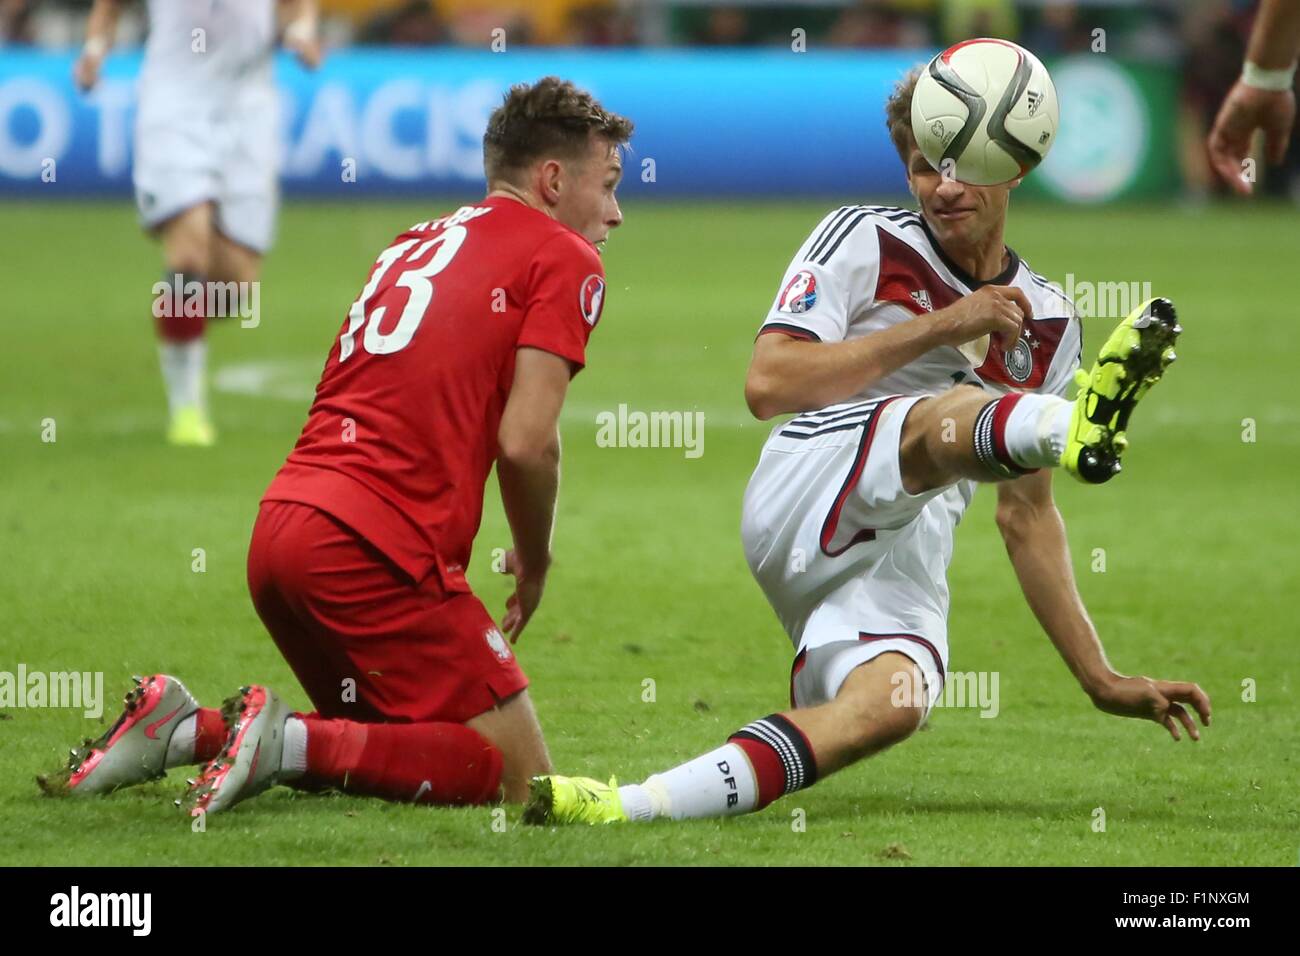 Germany's Thomas Mueller (vorn) and Poland's Maciej Rybus compete for the ball during the Group D qualifier for the European Championships at the Commerzbank-Arena in Frankfurt am Main, Germany, 4 September 2015. PHOTO: FREDRIK VON ERICHSEN/DPA Stock Photo